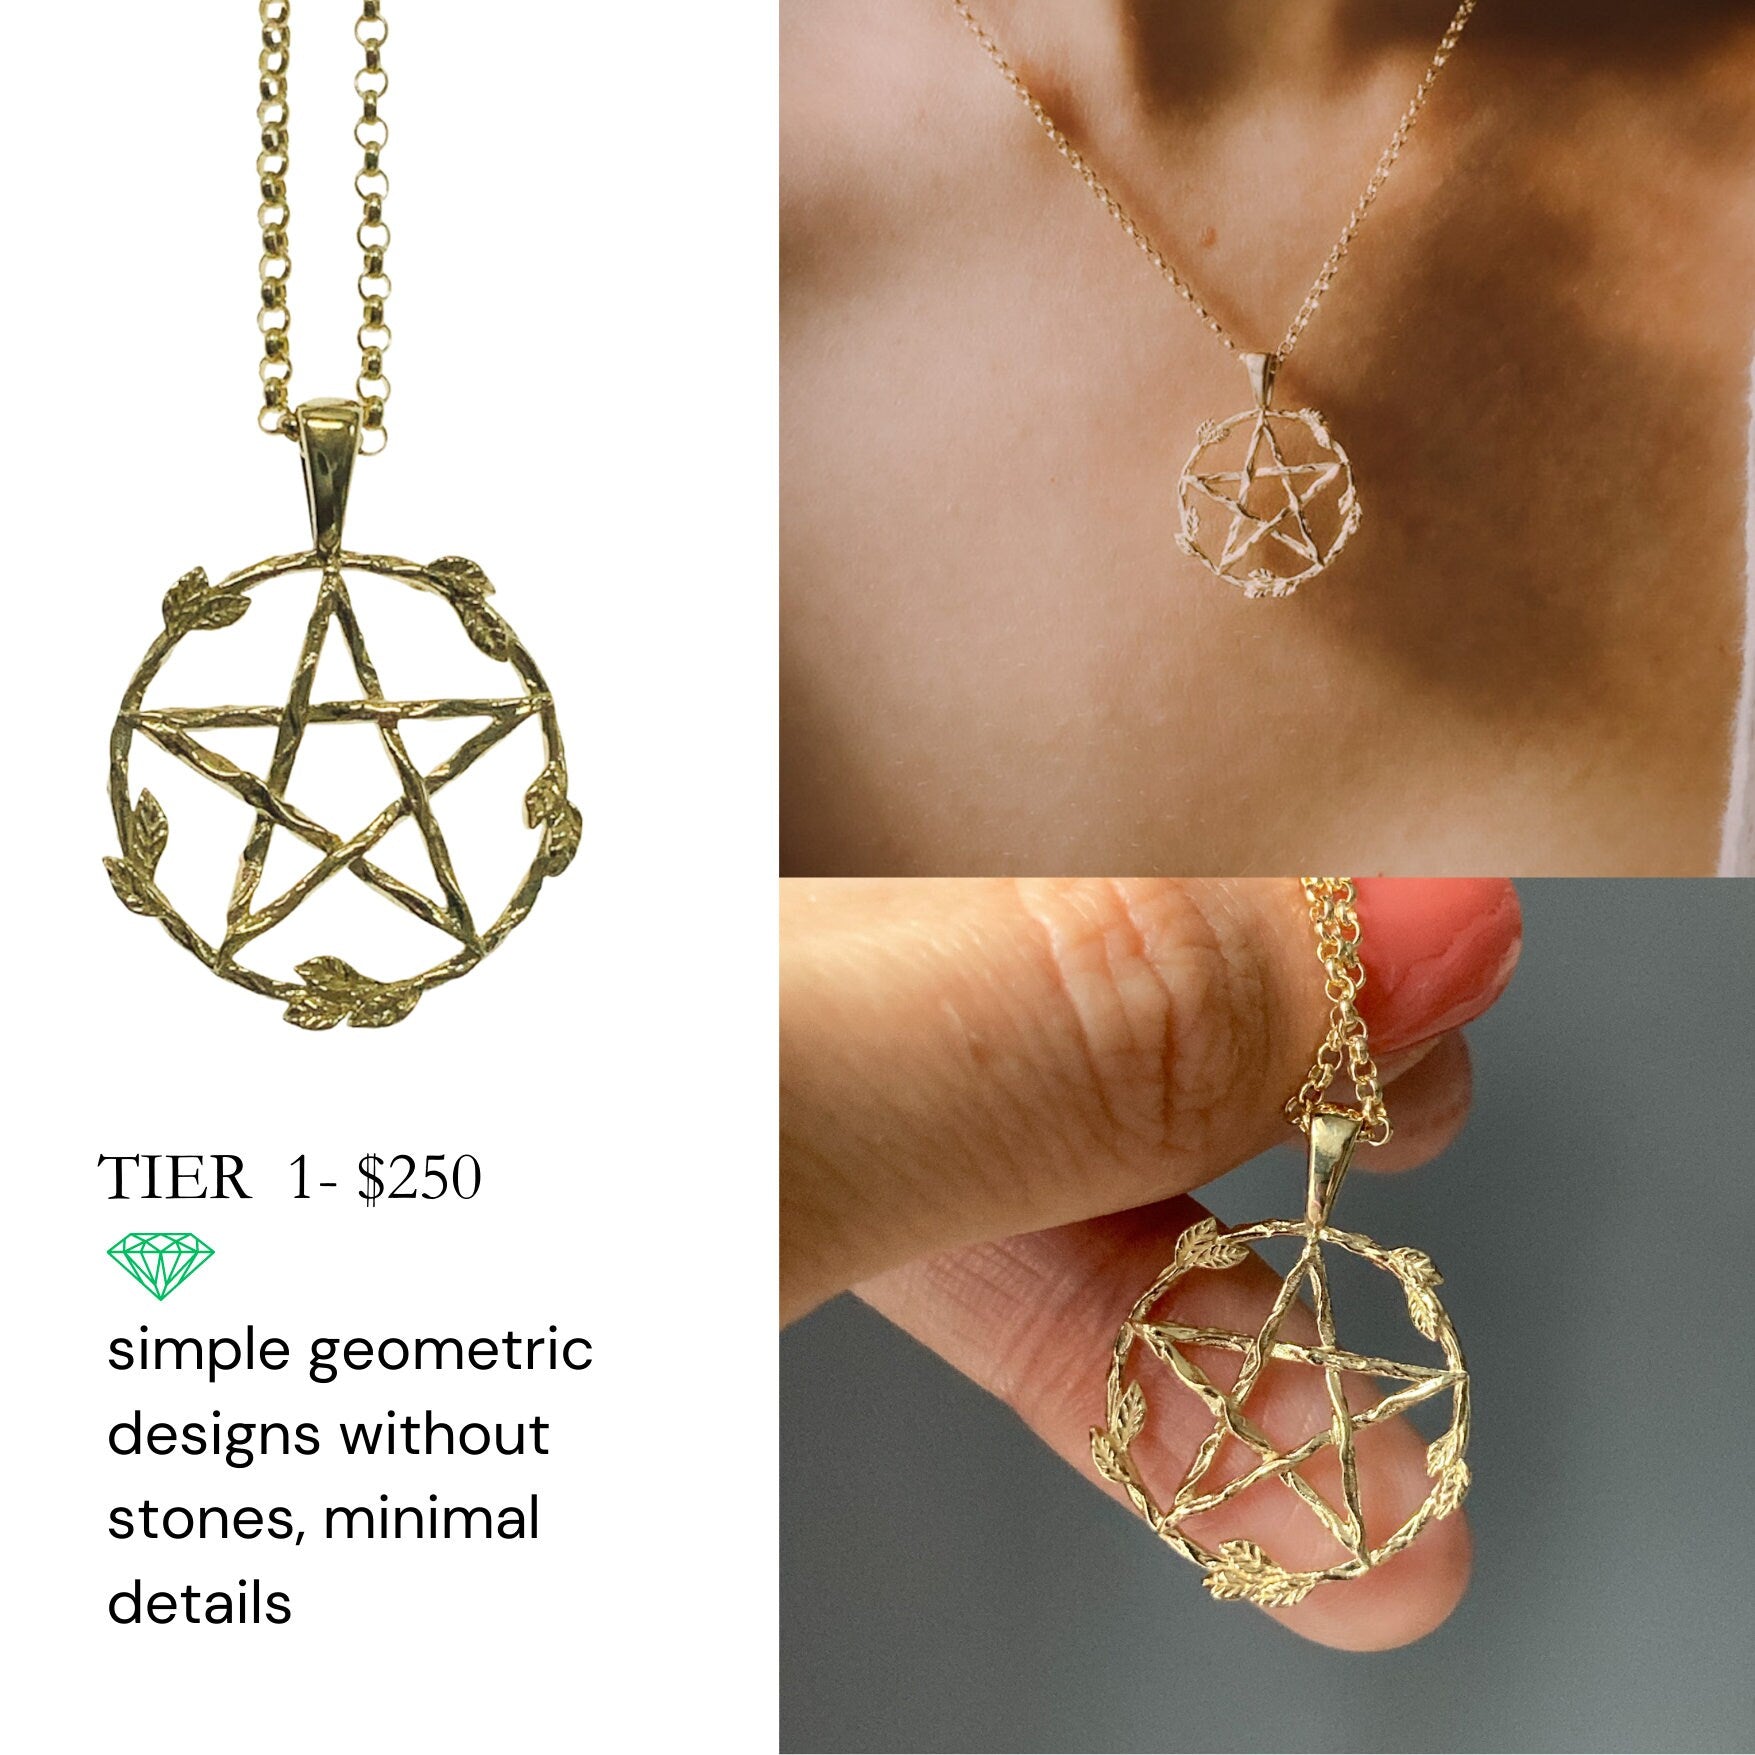 Create your own 3D printed Jewelry